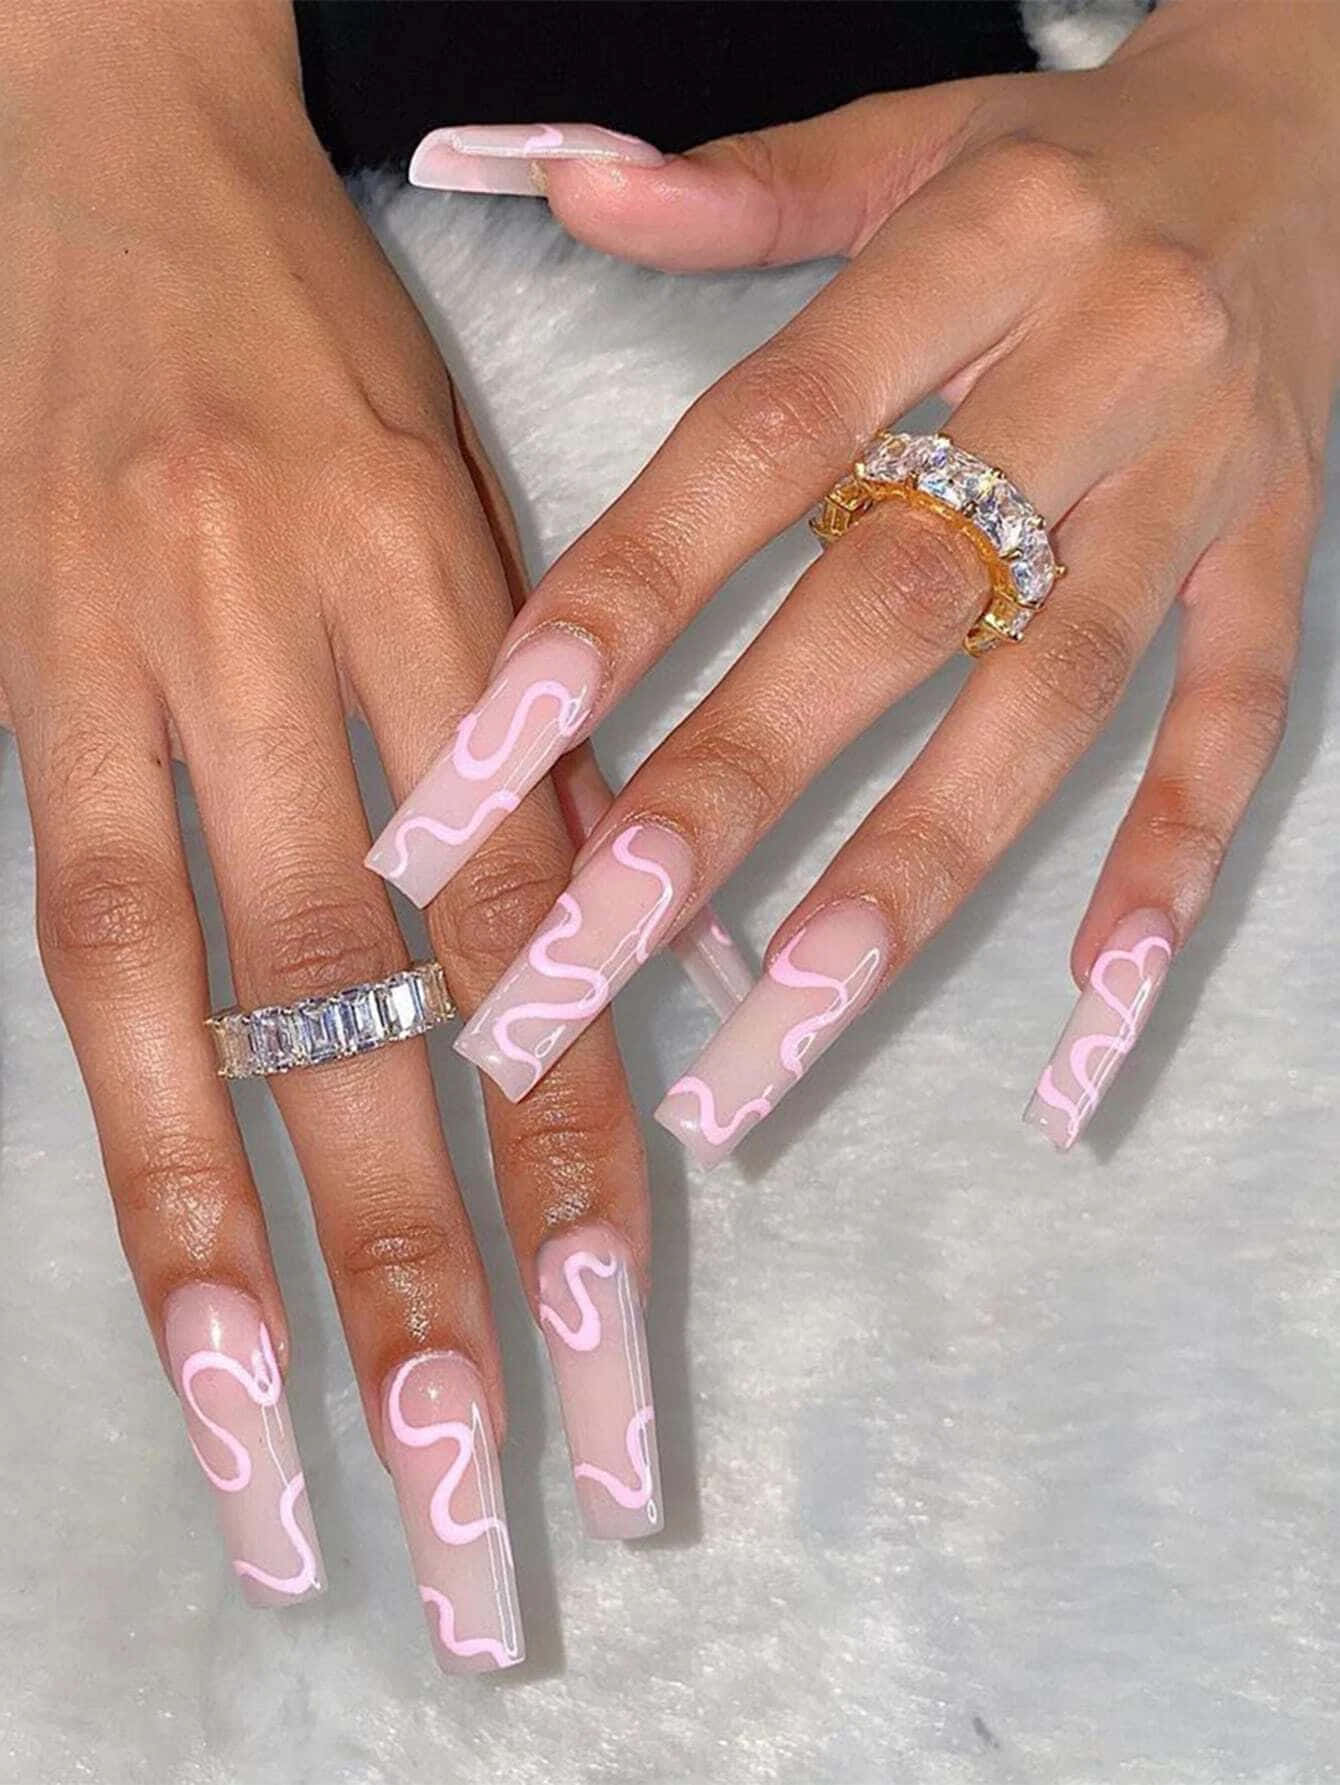 A Woman With Pink Nails And Rings